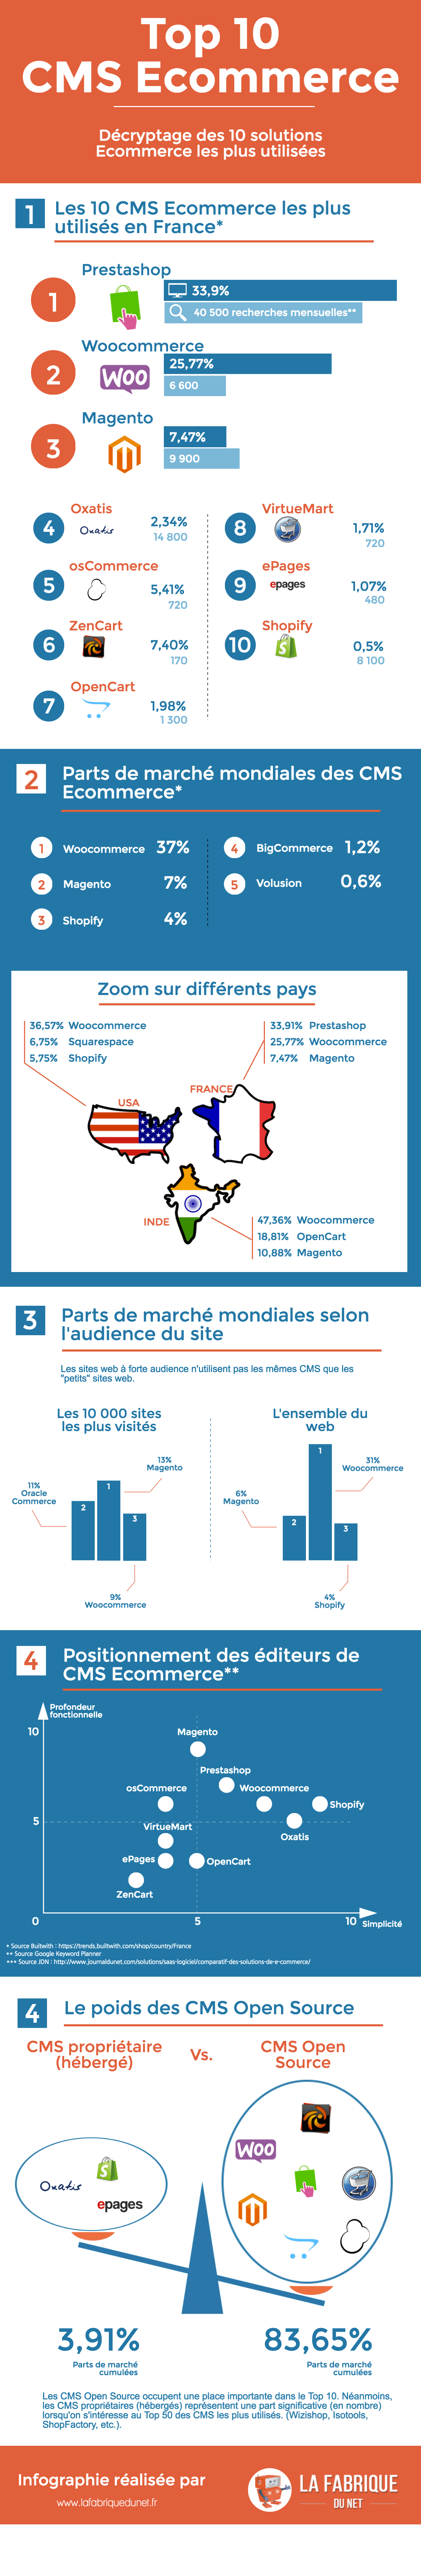 infographie top 10 cms ecommerce